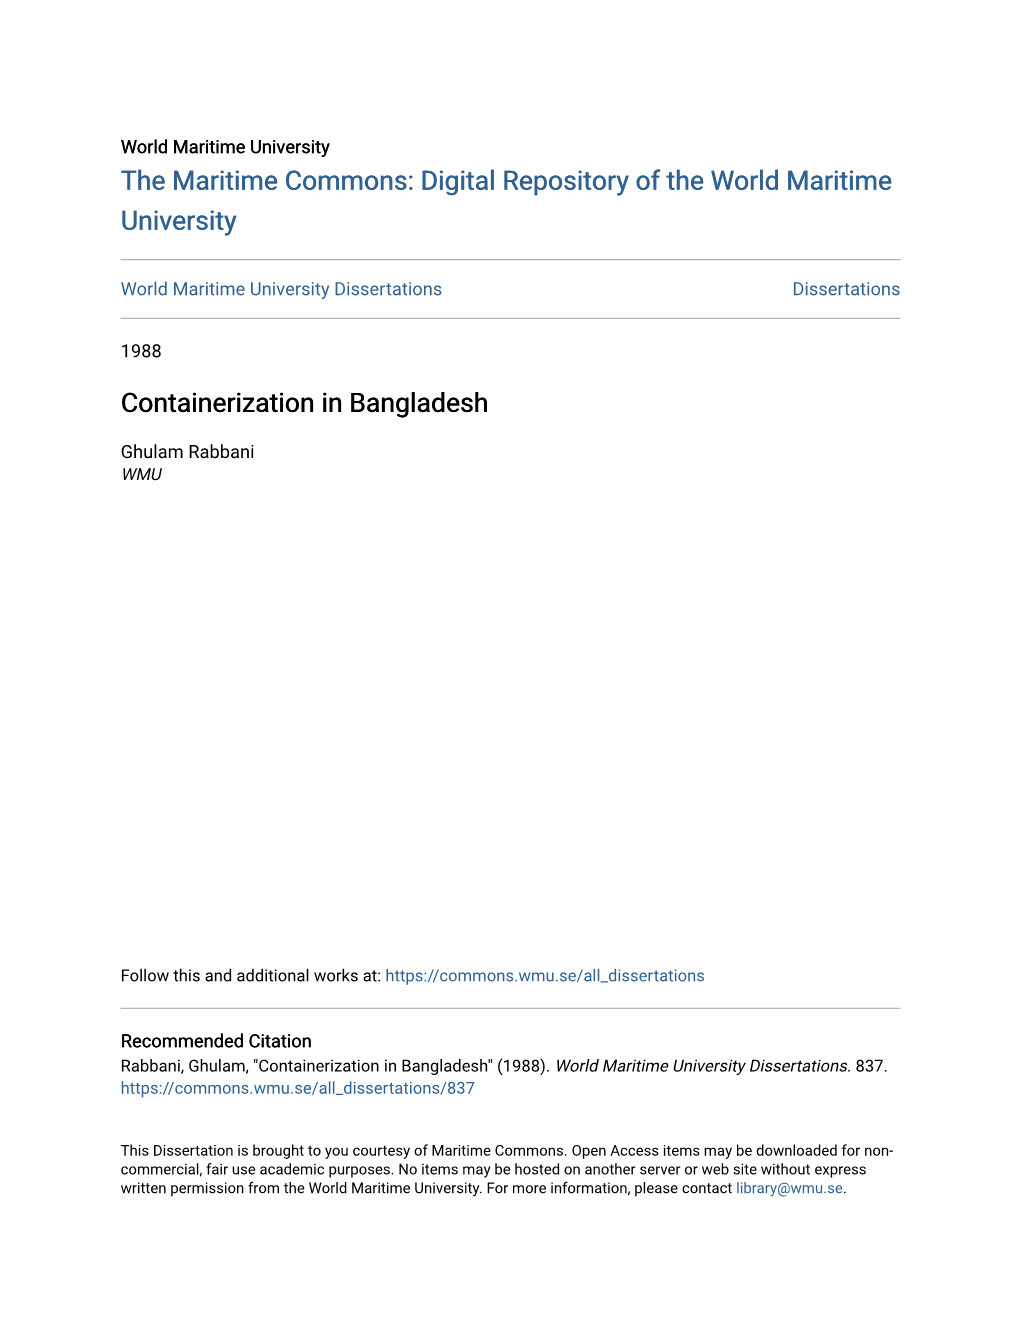 Containerization in Bangladesh